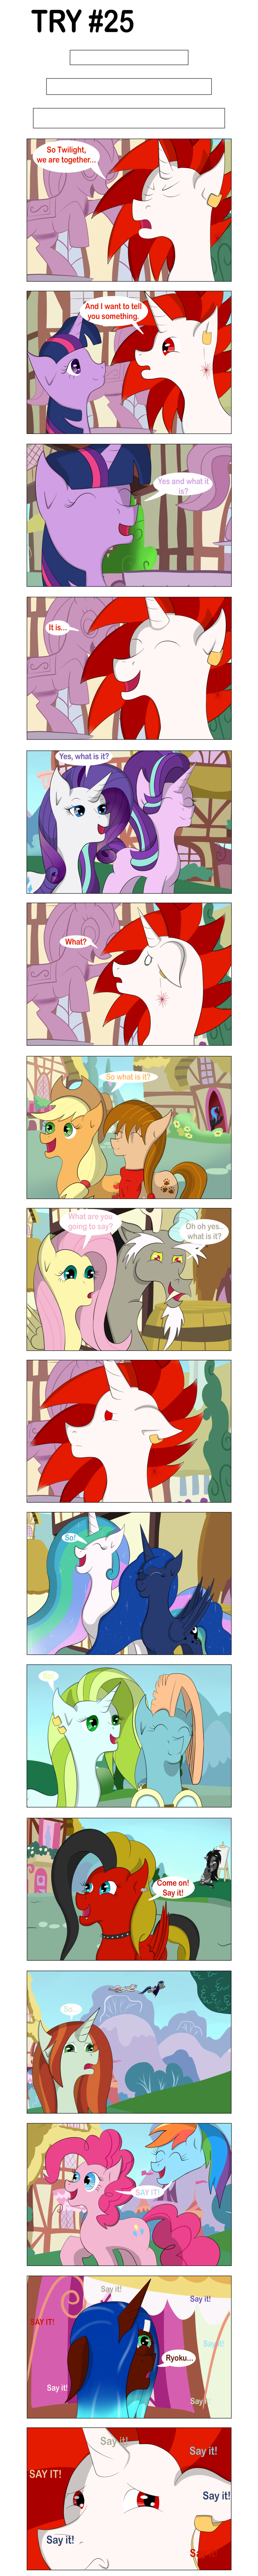 Page 25 - Part 1